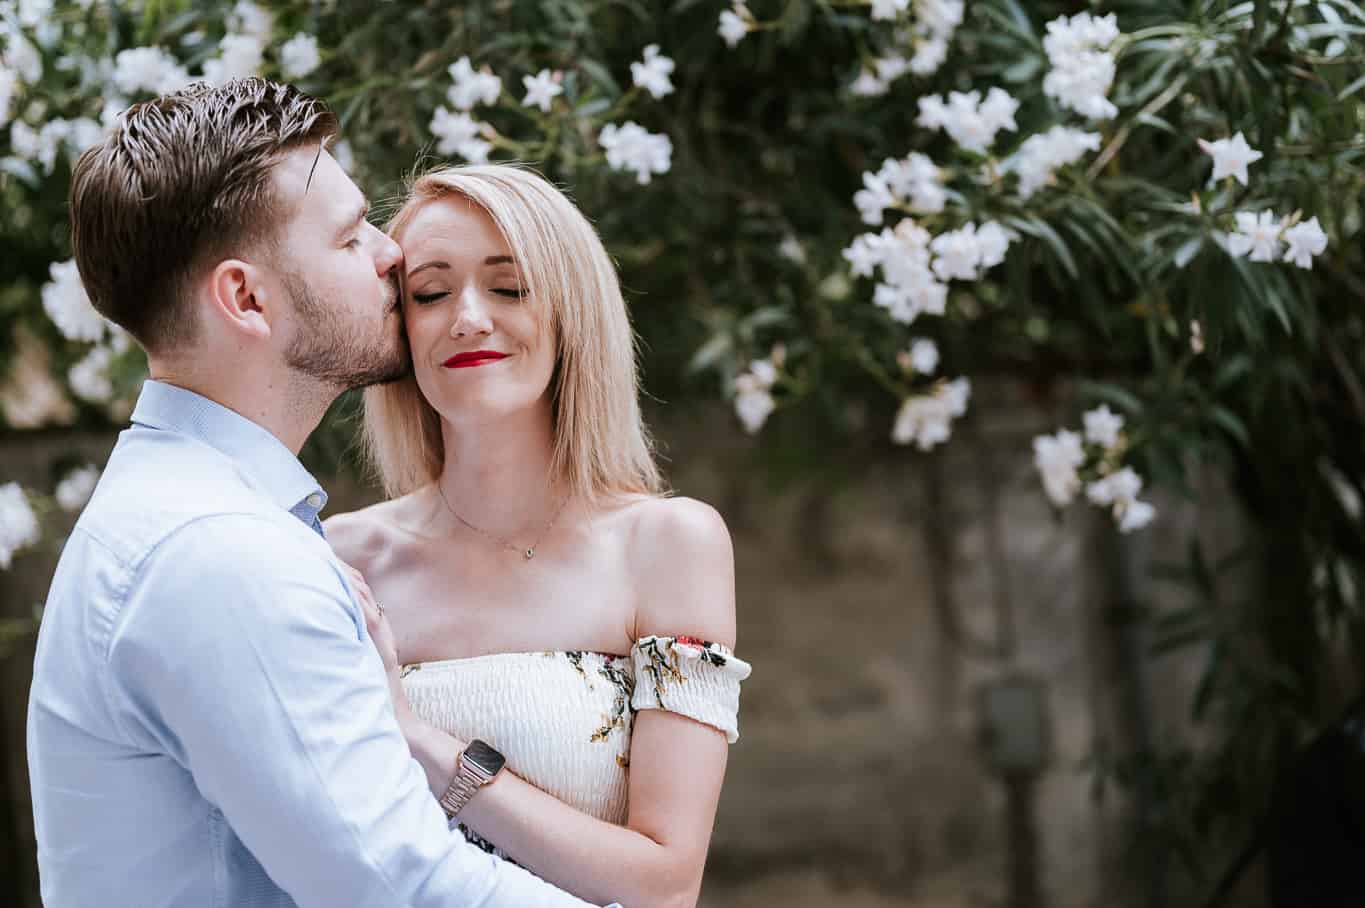 couple nuzzling with eyes closed during engagement photo shoot in front of greenery and white flowers on streets of Rome Italy  